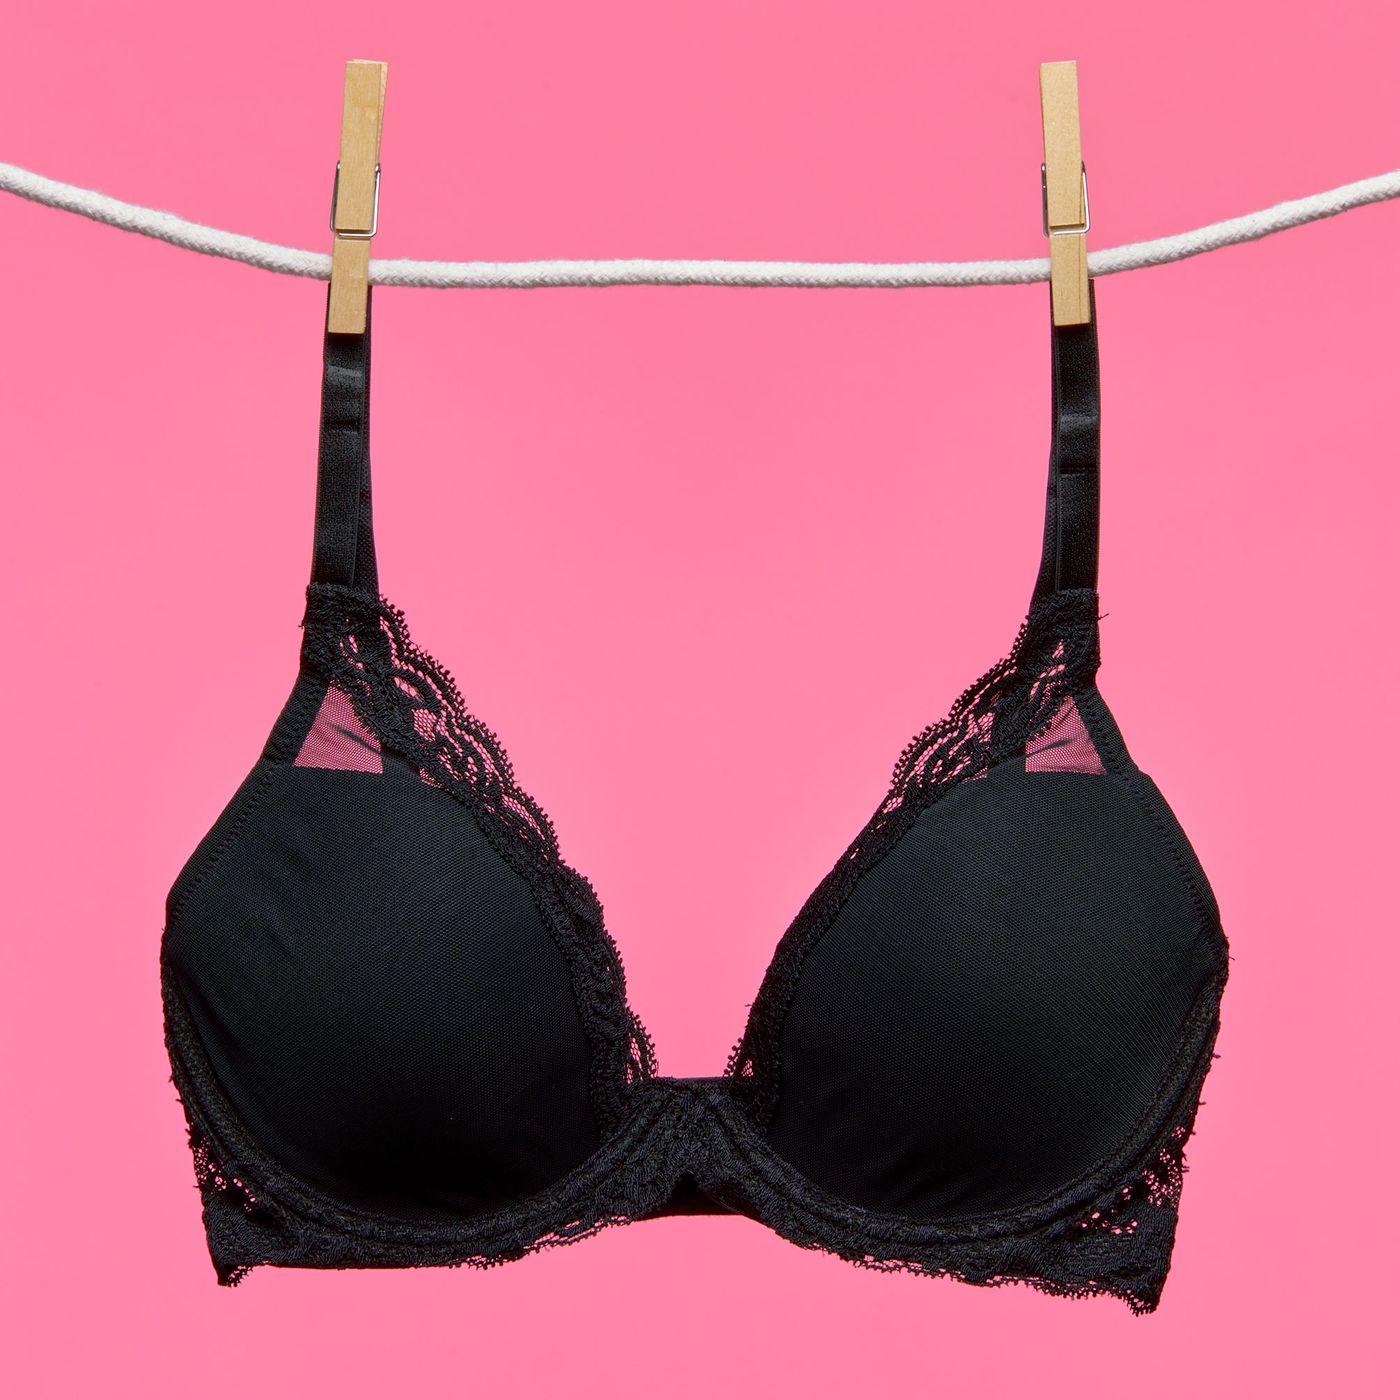 17 Affordable and Supportive Minimizer Bras You Can Buy Now at